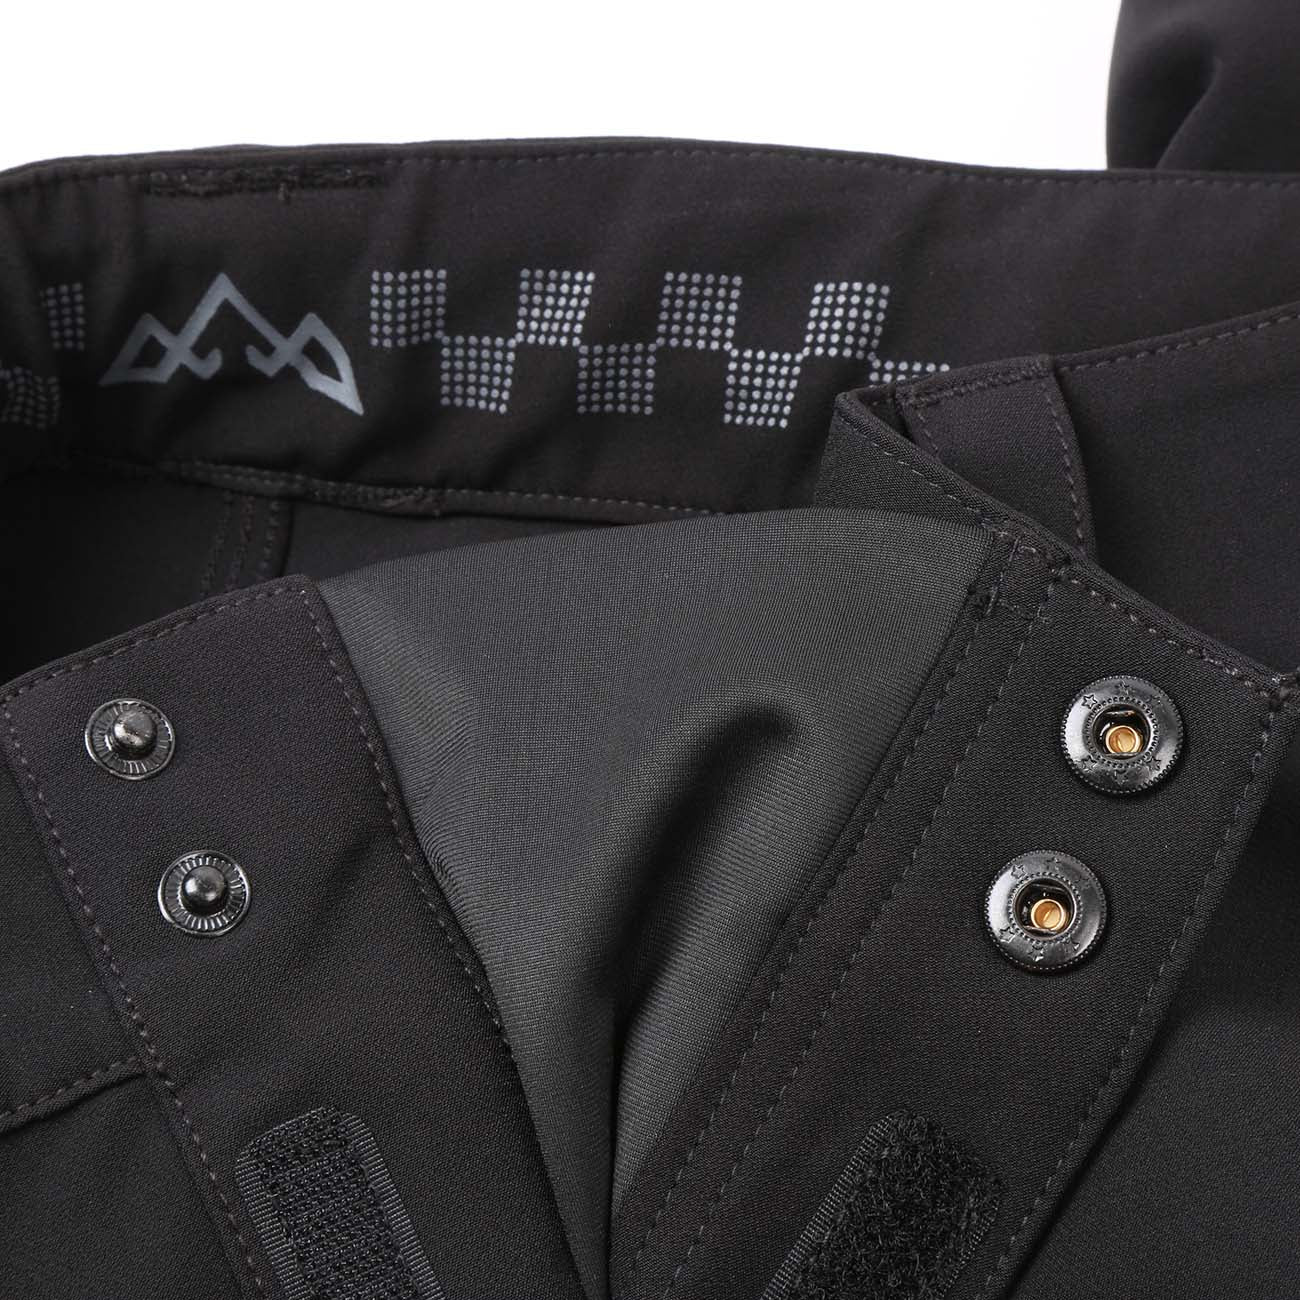 Scout MTB Pants - Lightweight fly closure construction and premium spring snaps closure.